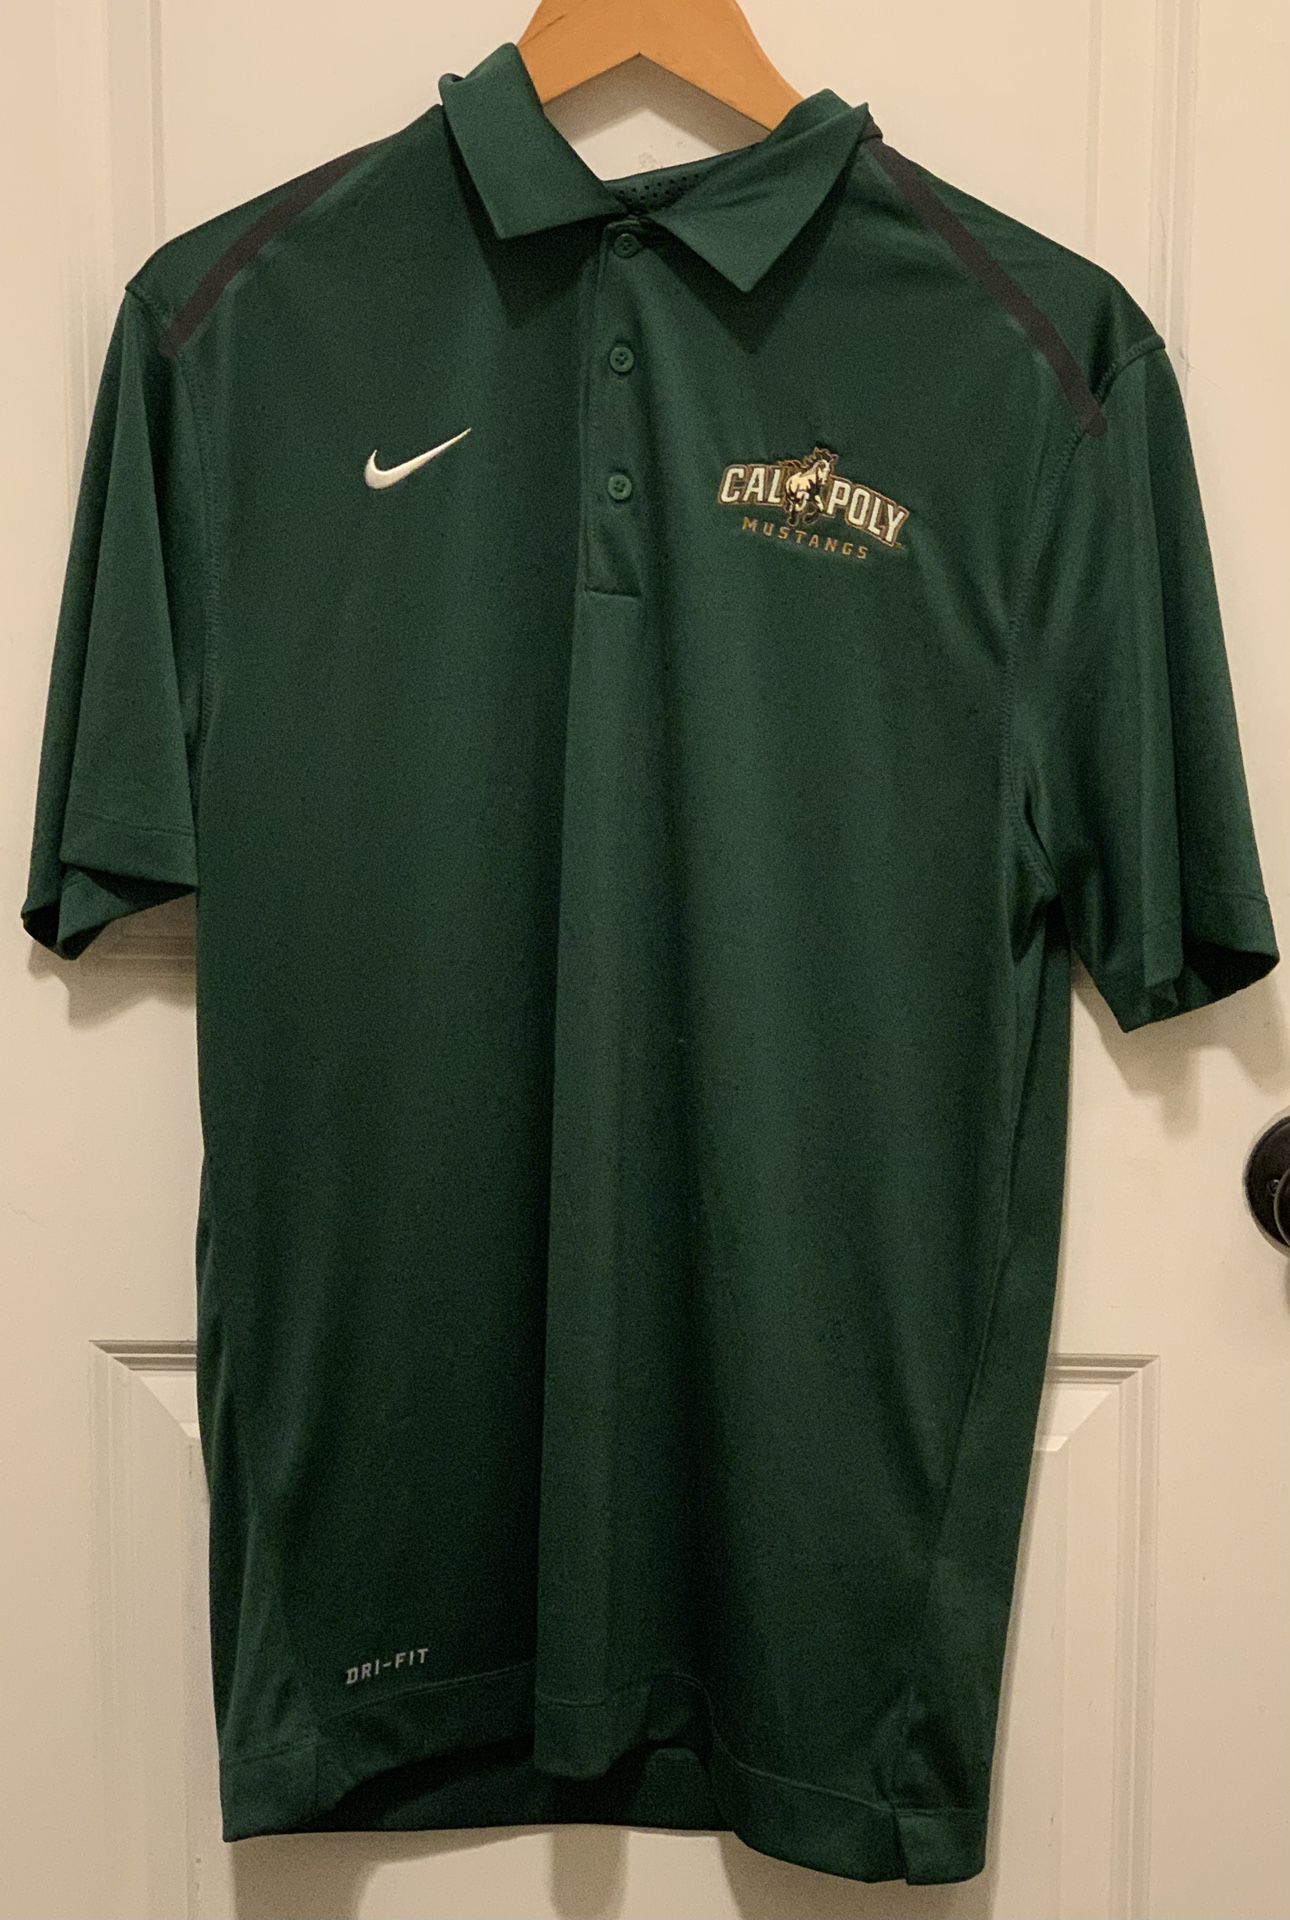 Nike Cal Poly Football Dri Fit Polo Size Medium Gently Used 